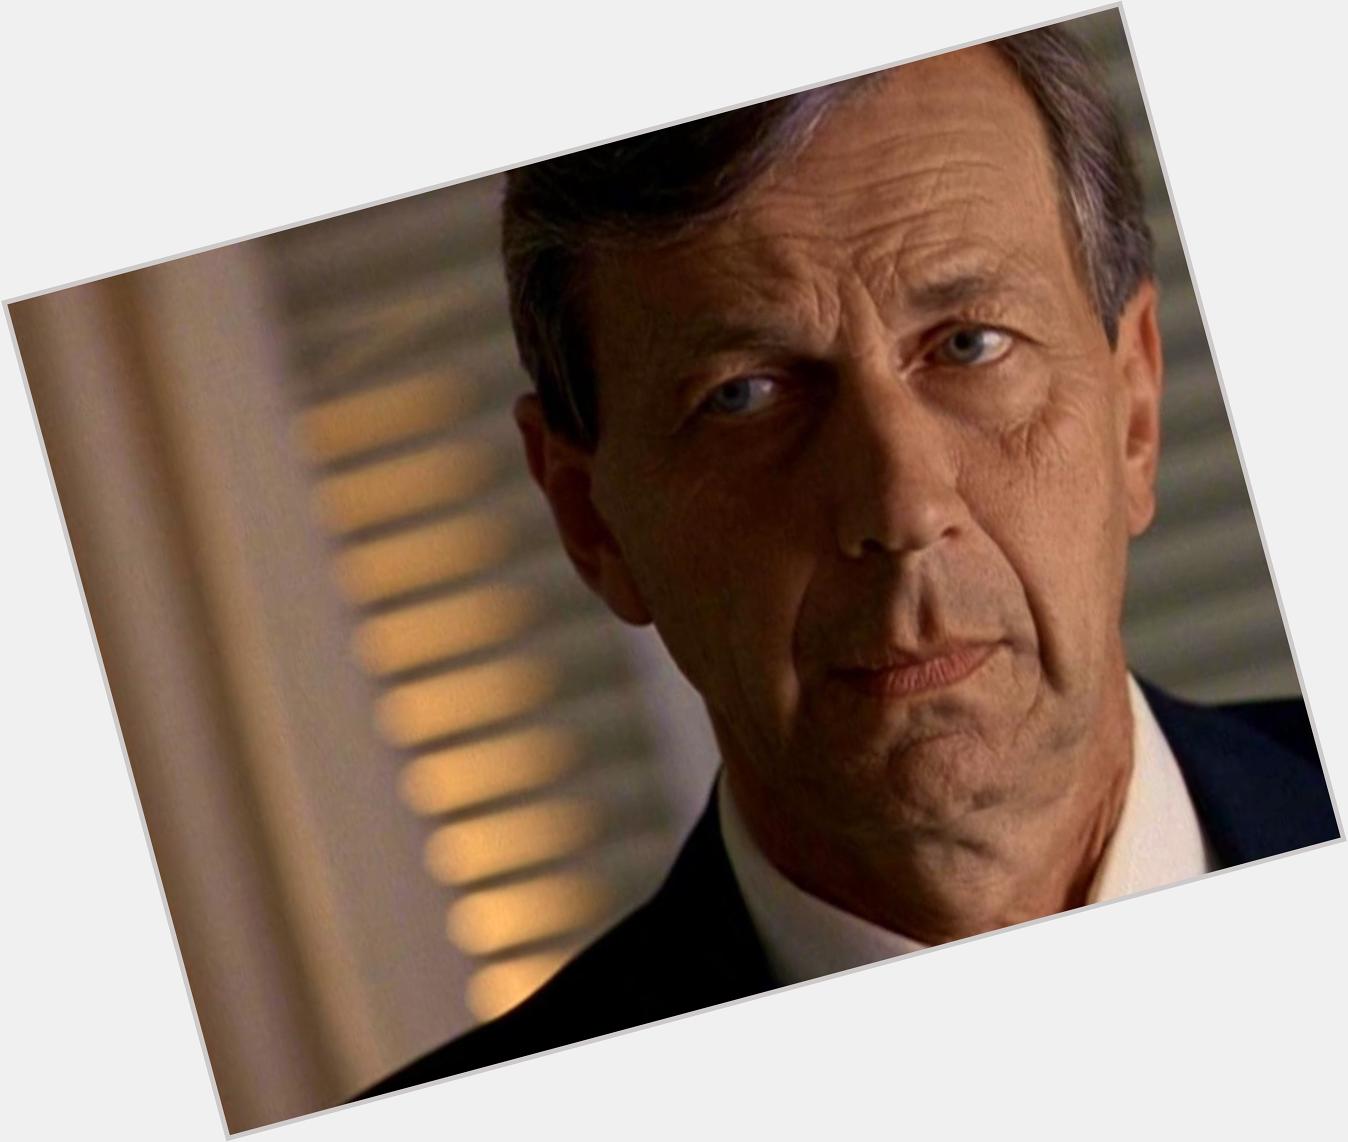 Happy to the great William B. Davis, a.k.a. our Cigarette Smoking Man! 